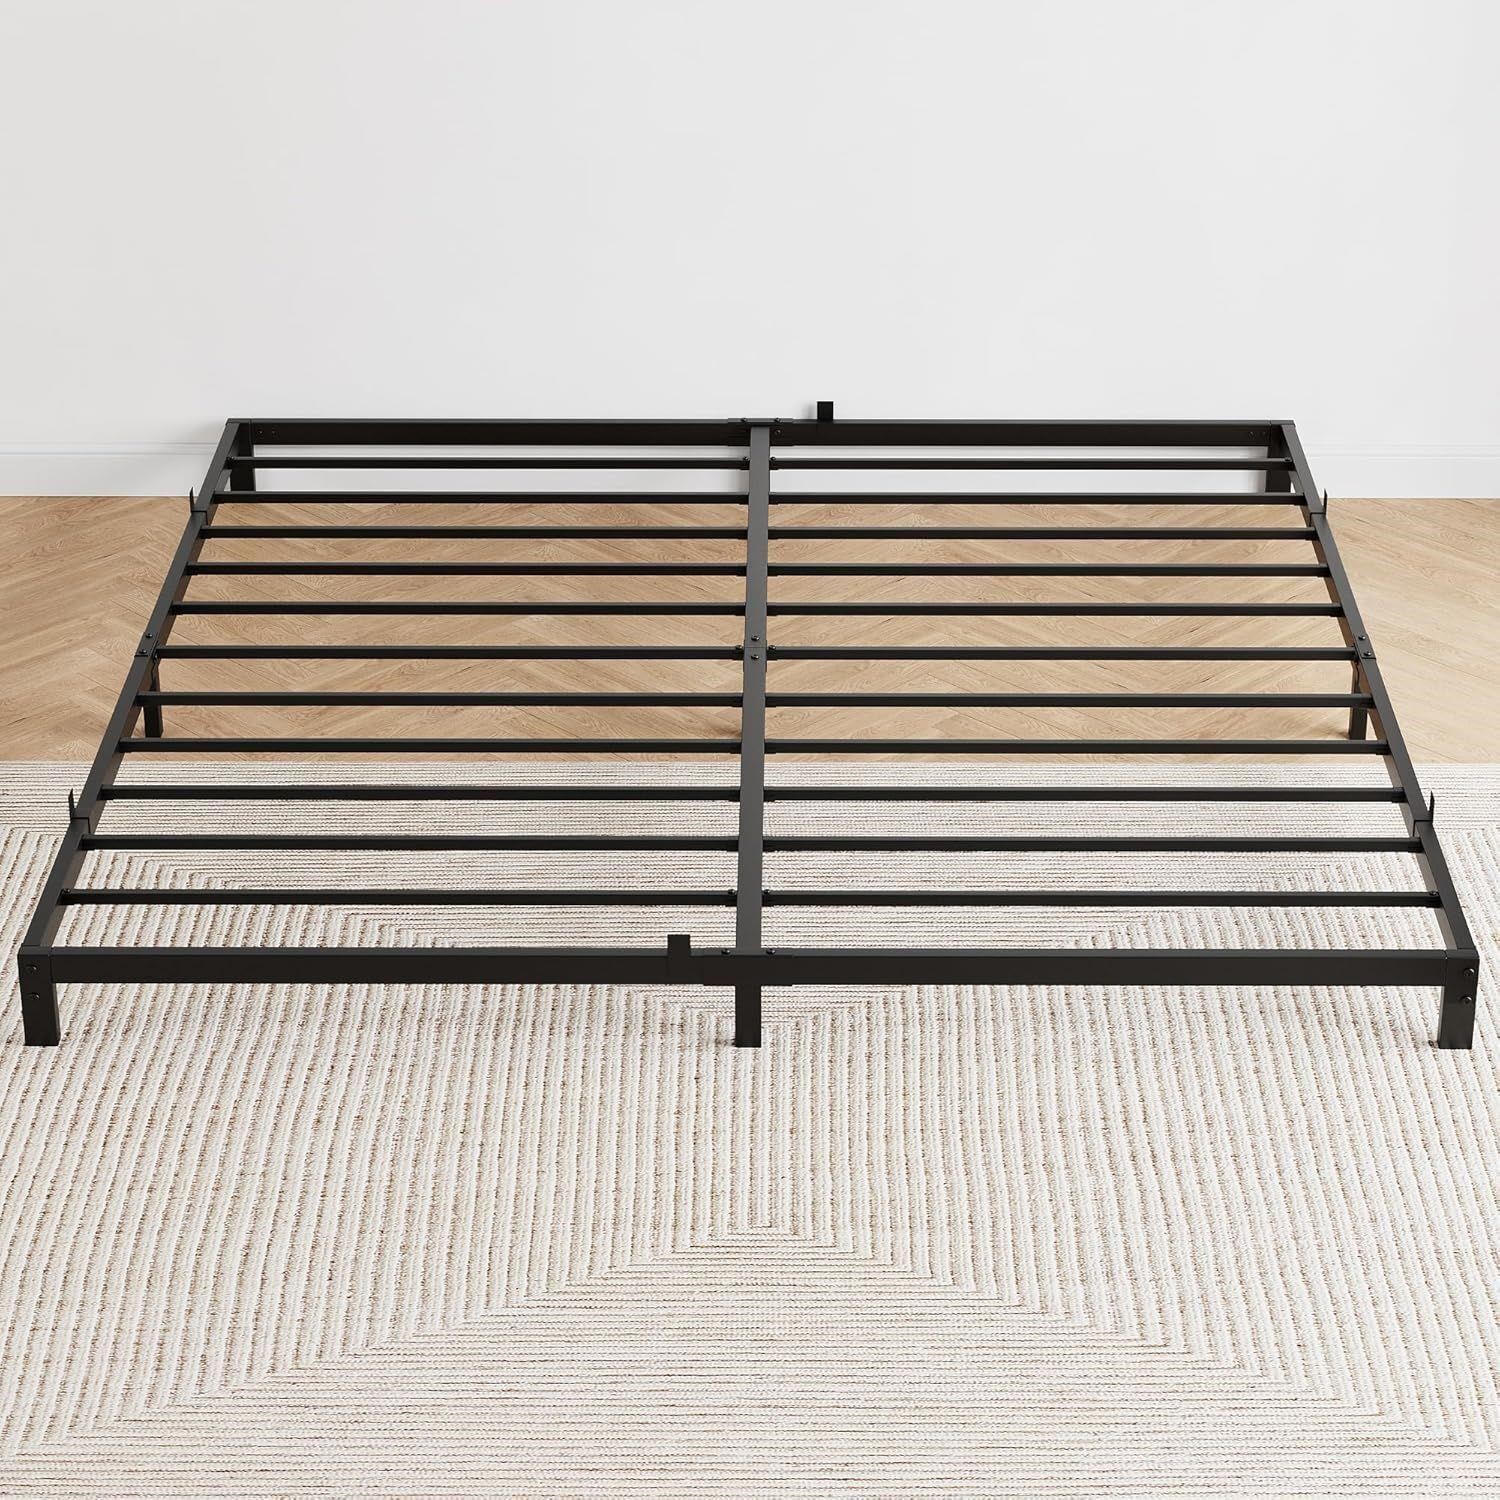 IDEALHOUSE 6 Inch King Bed Frame